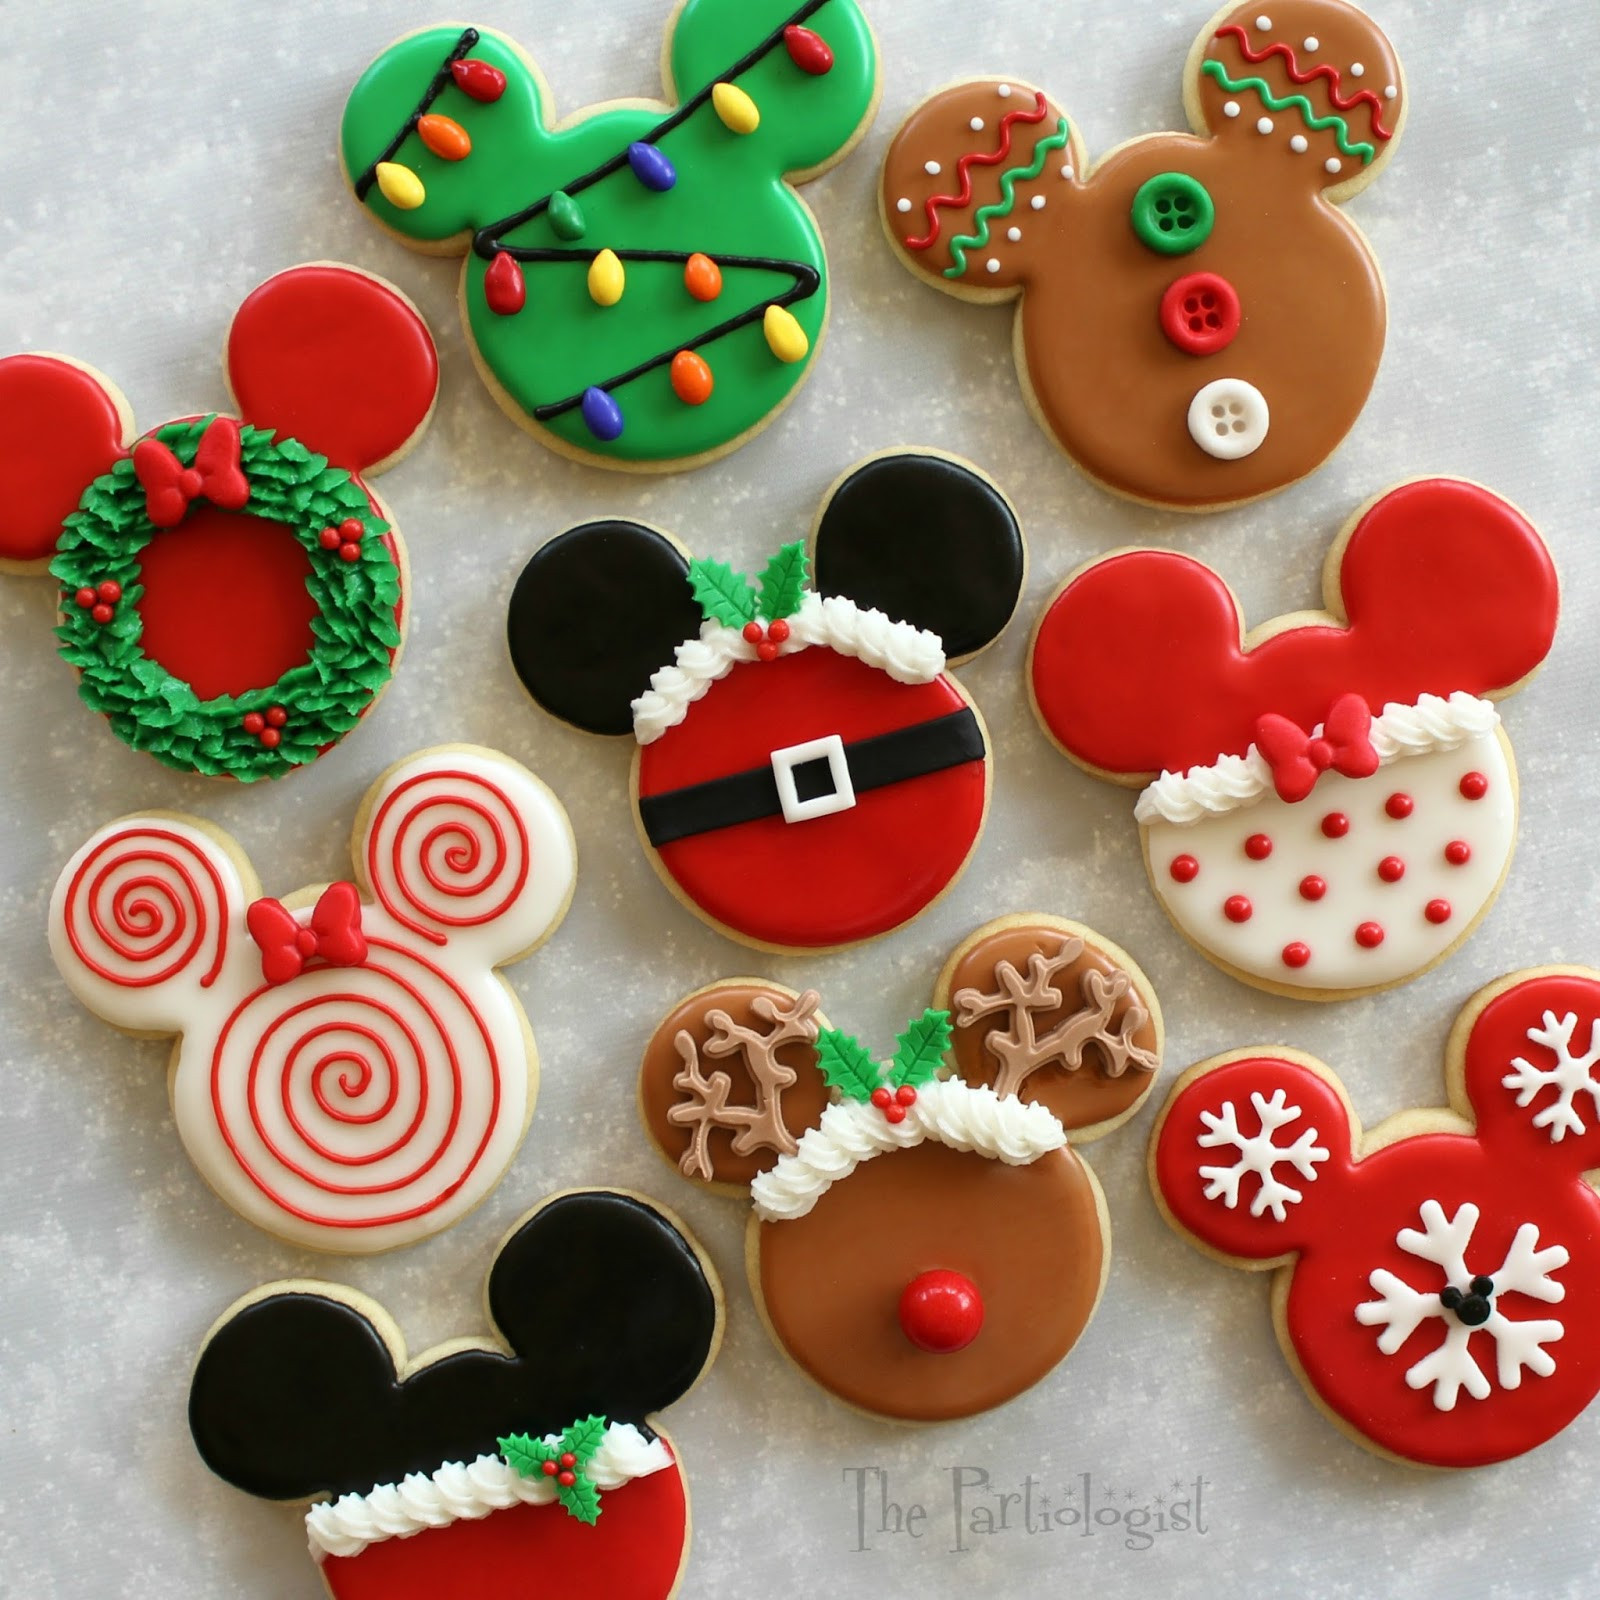 Mickey Mouse Christmas Cookies
 The Partiologist Disney Themed Christmas Cookies